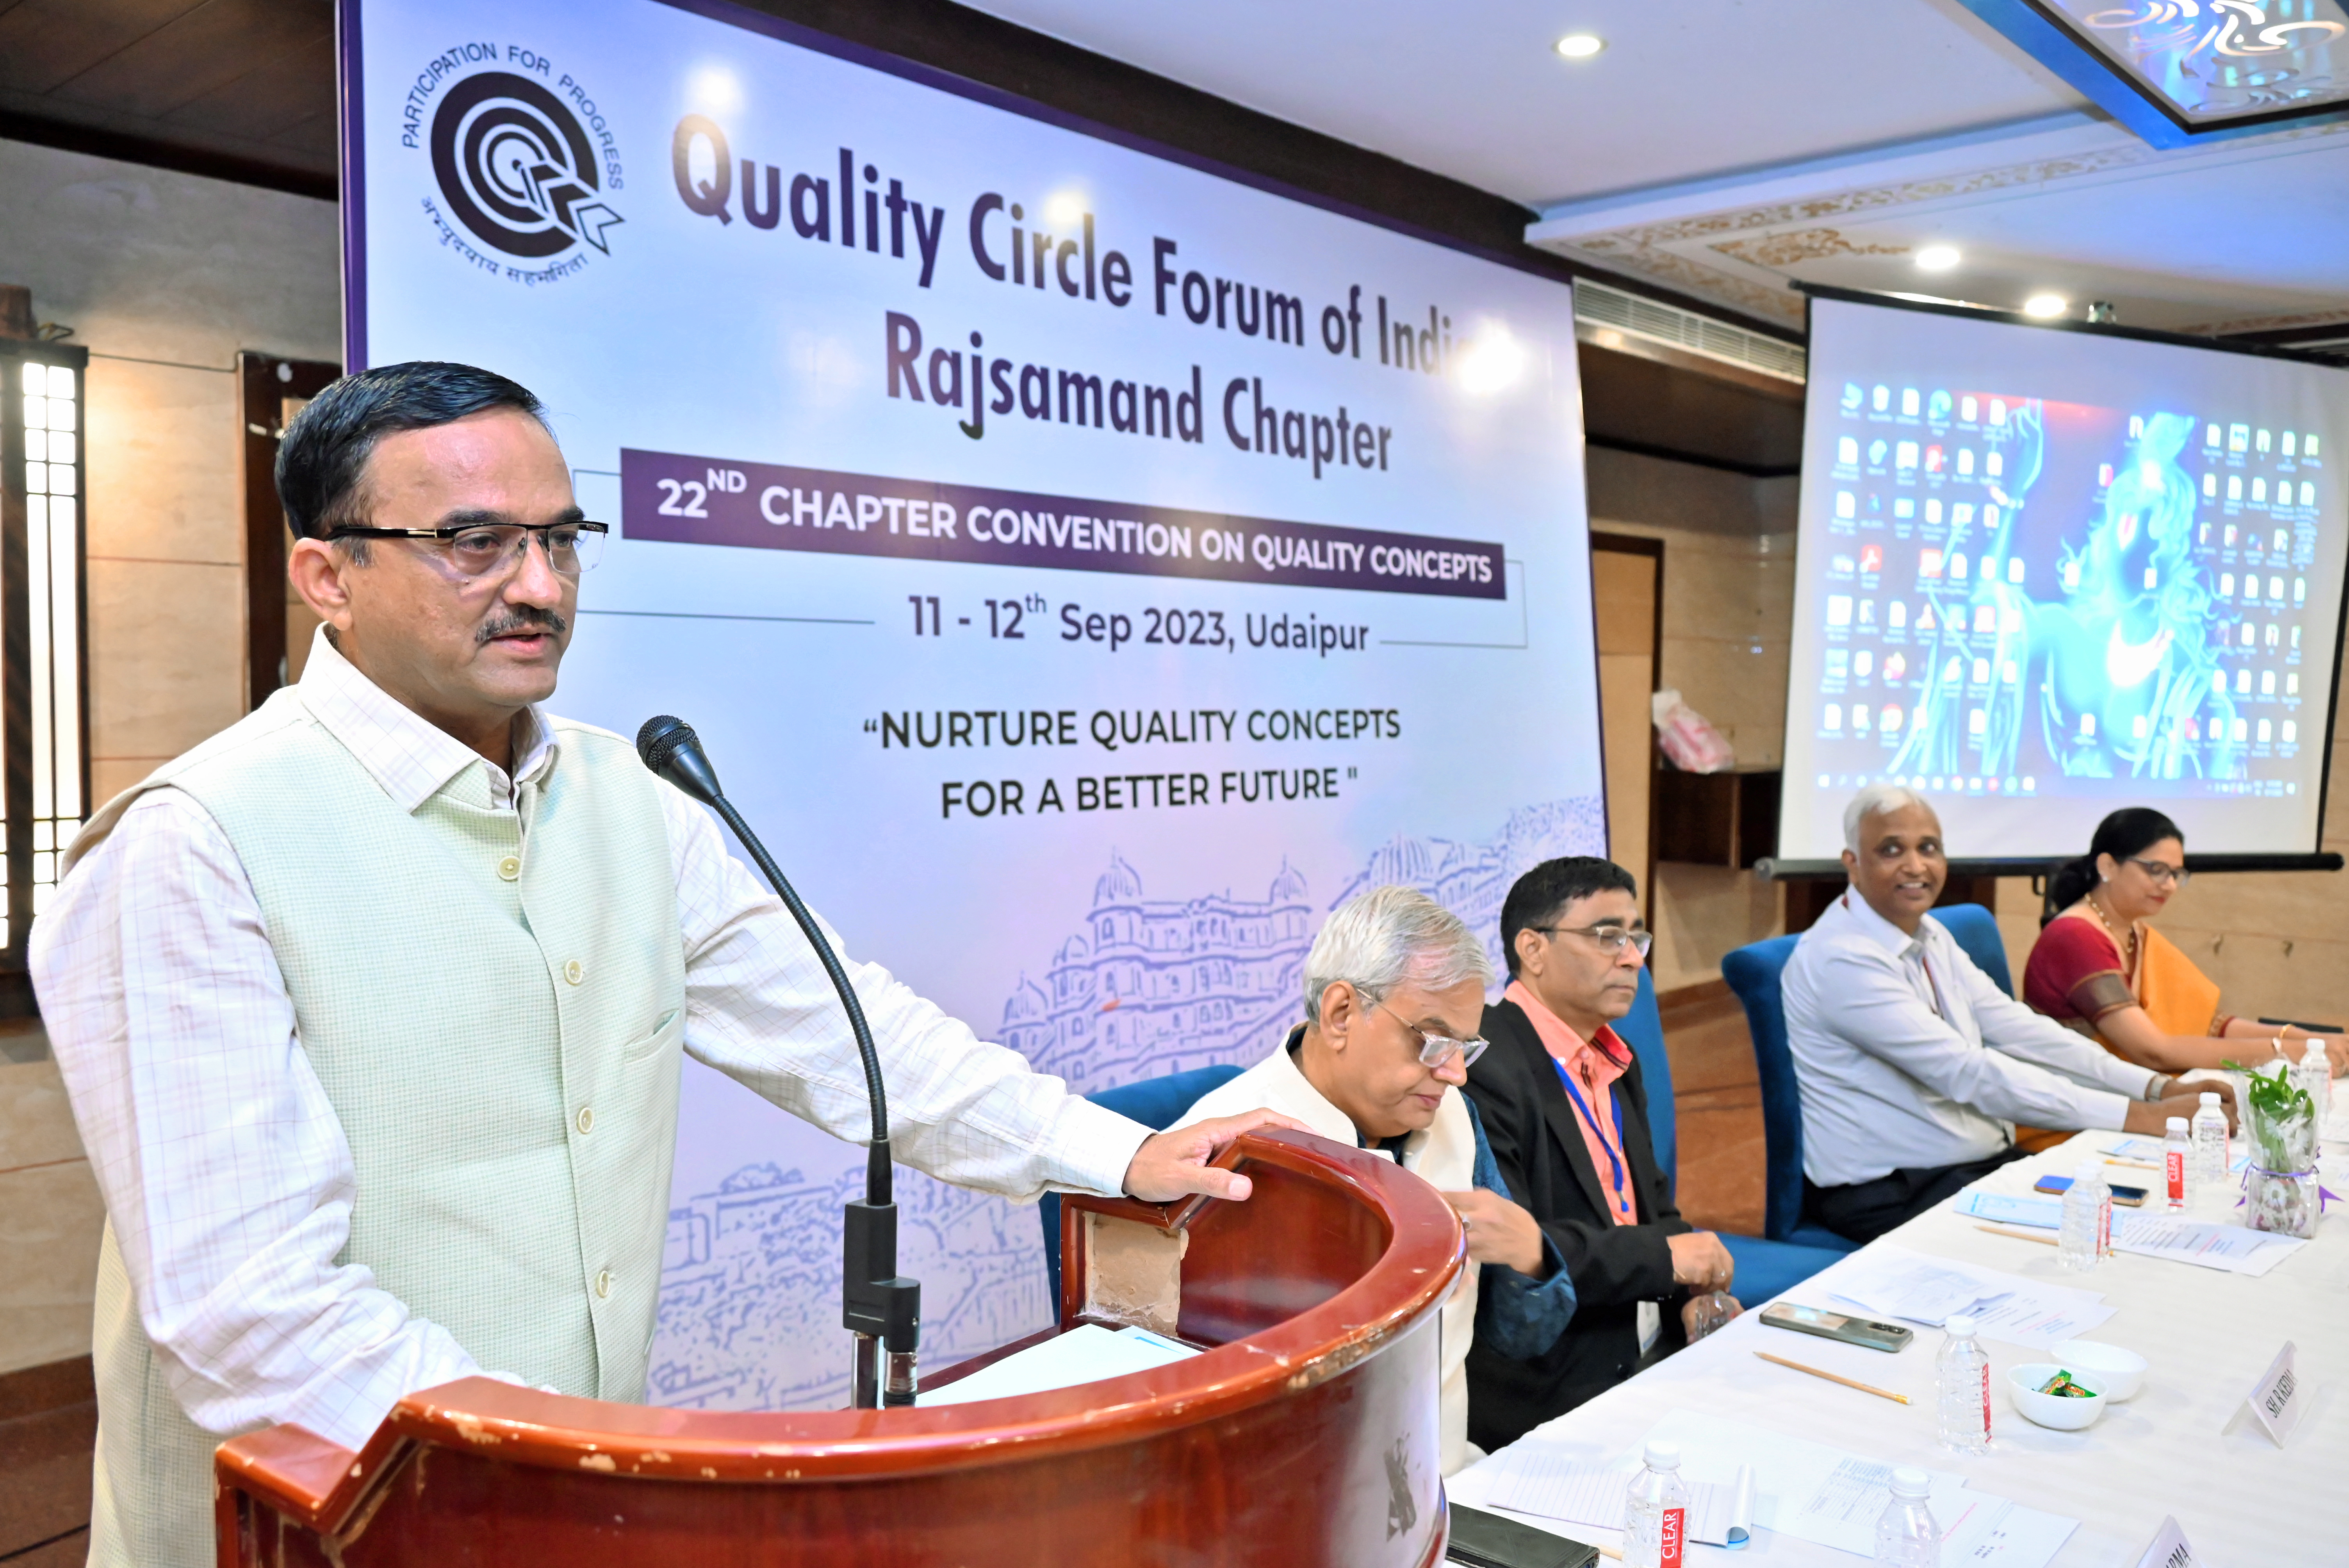 "Quality Circle Forum of India" Concludes Two-Day Convention